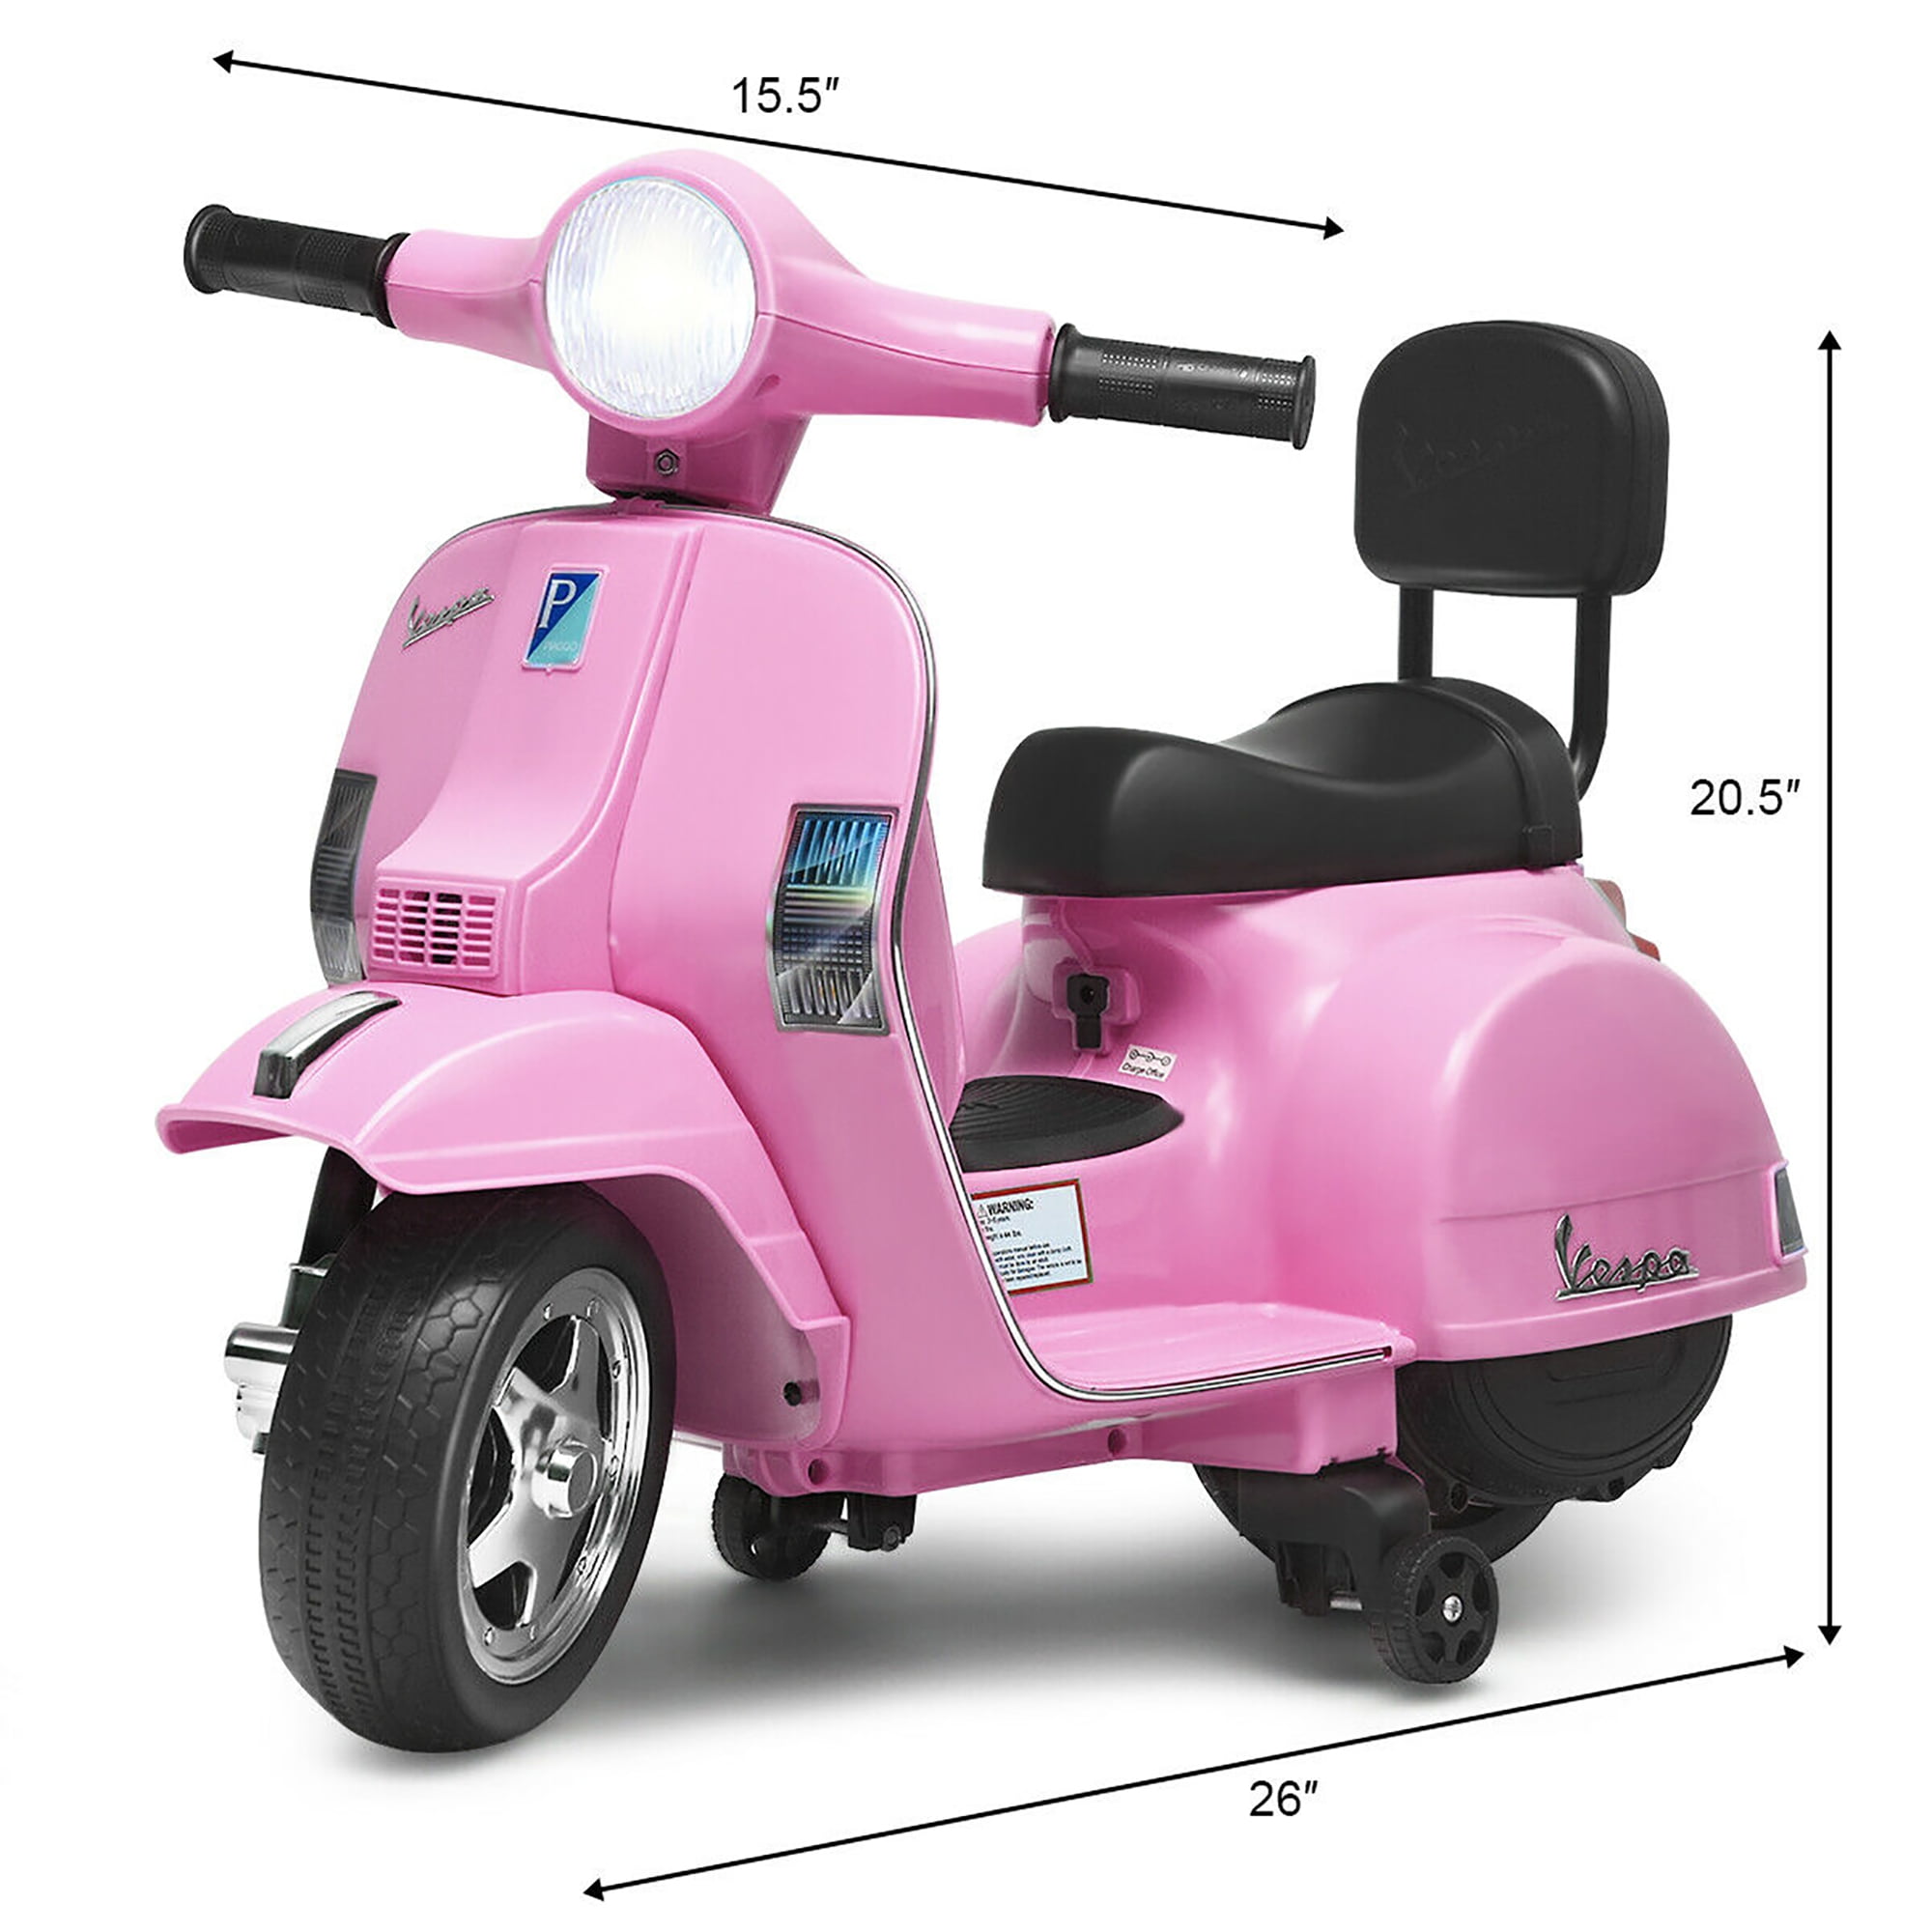 Costway 6V Ride On Vespa Scooter Motorcycle for Toddler w/ Training Wheels Pink - Walmart.com